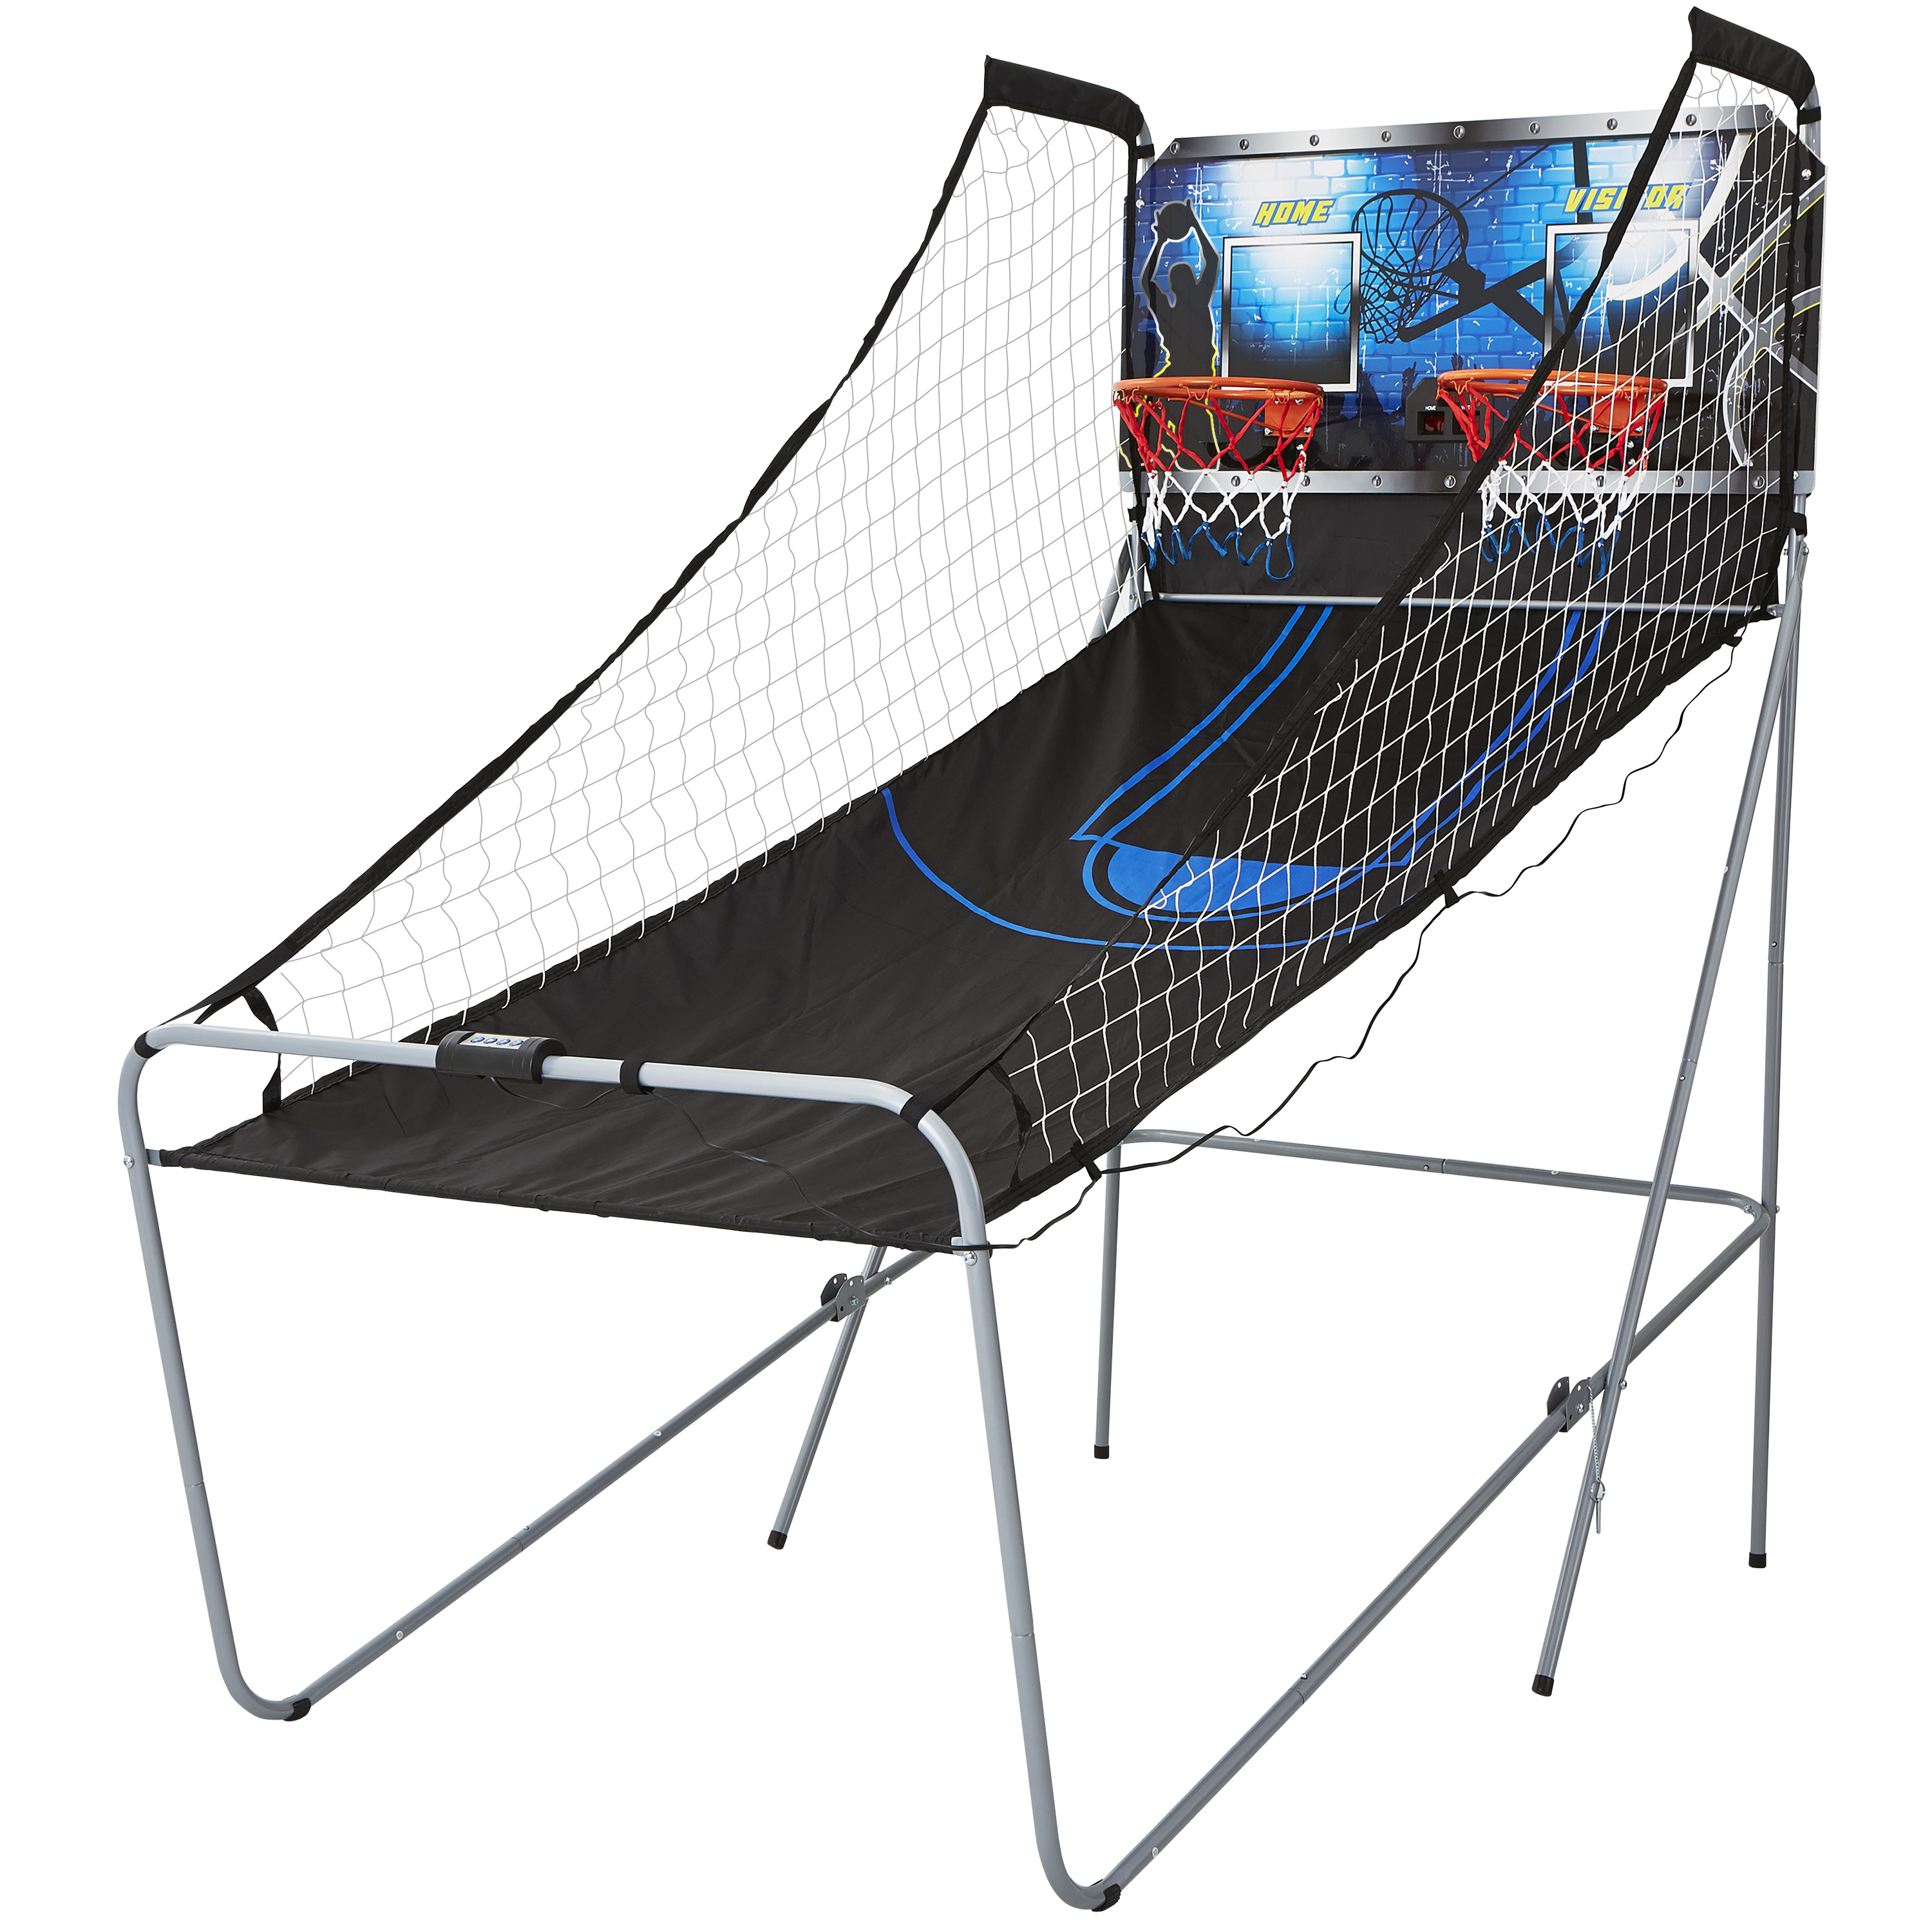 MD Sports Best Shot 2-Player 81 inch Foldable Arcade Basketball Game - image 1 of 10